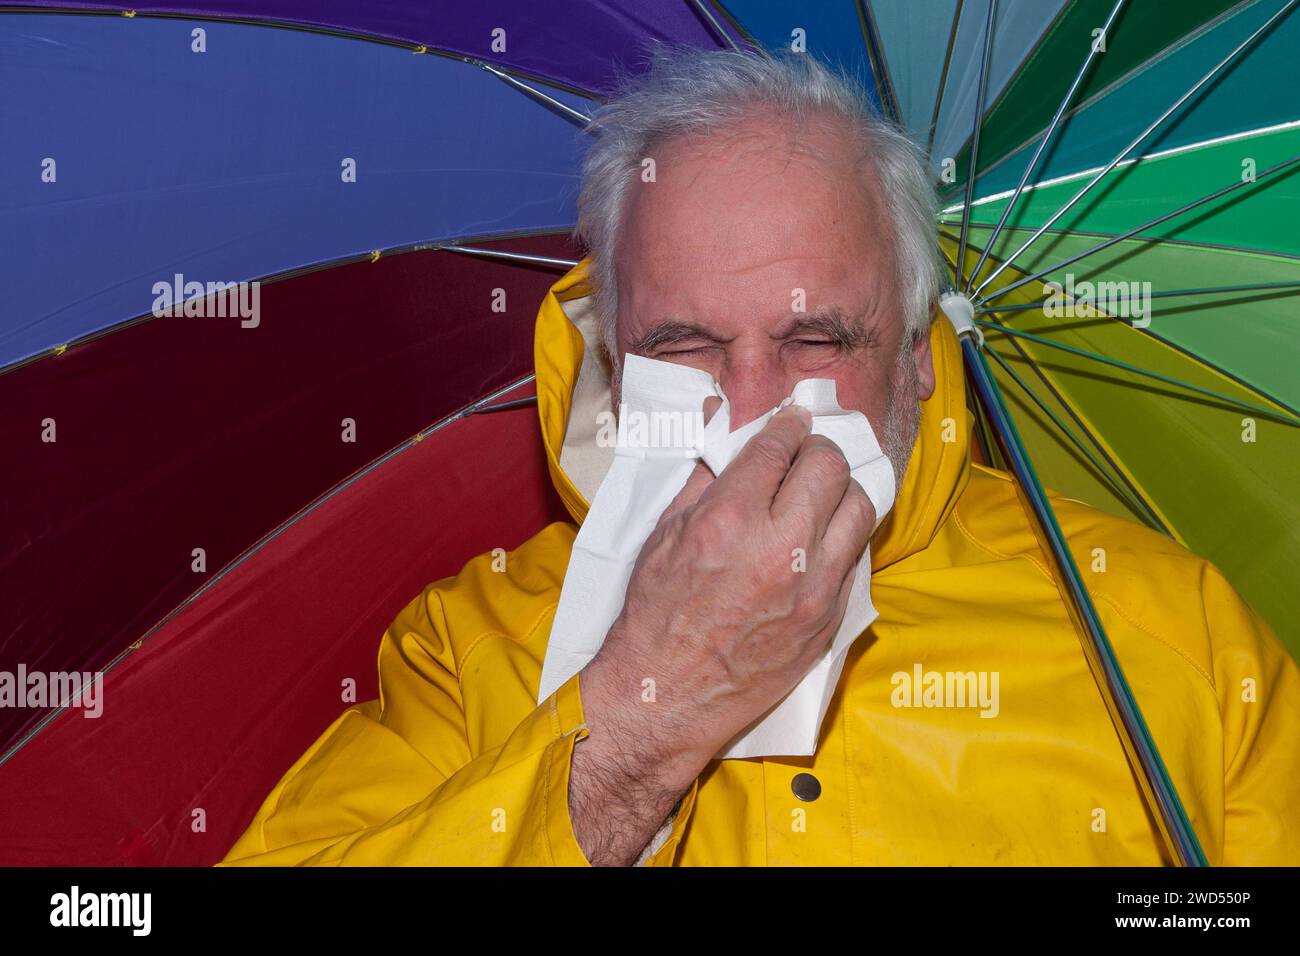 An older man in a yellow raincoat with an colorful umbrella defies the bad weather although he is plagued by a runny nose. Stock Photo